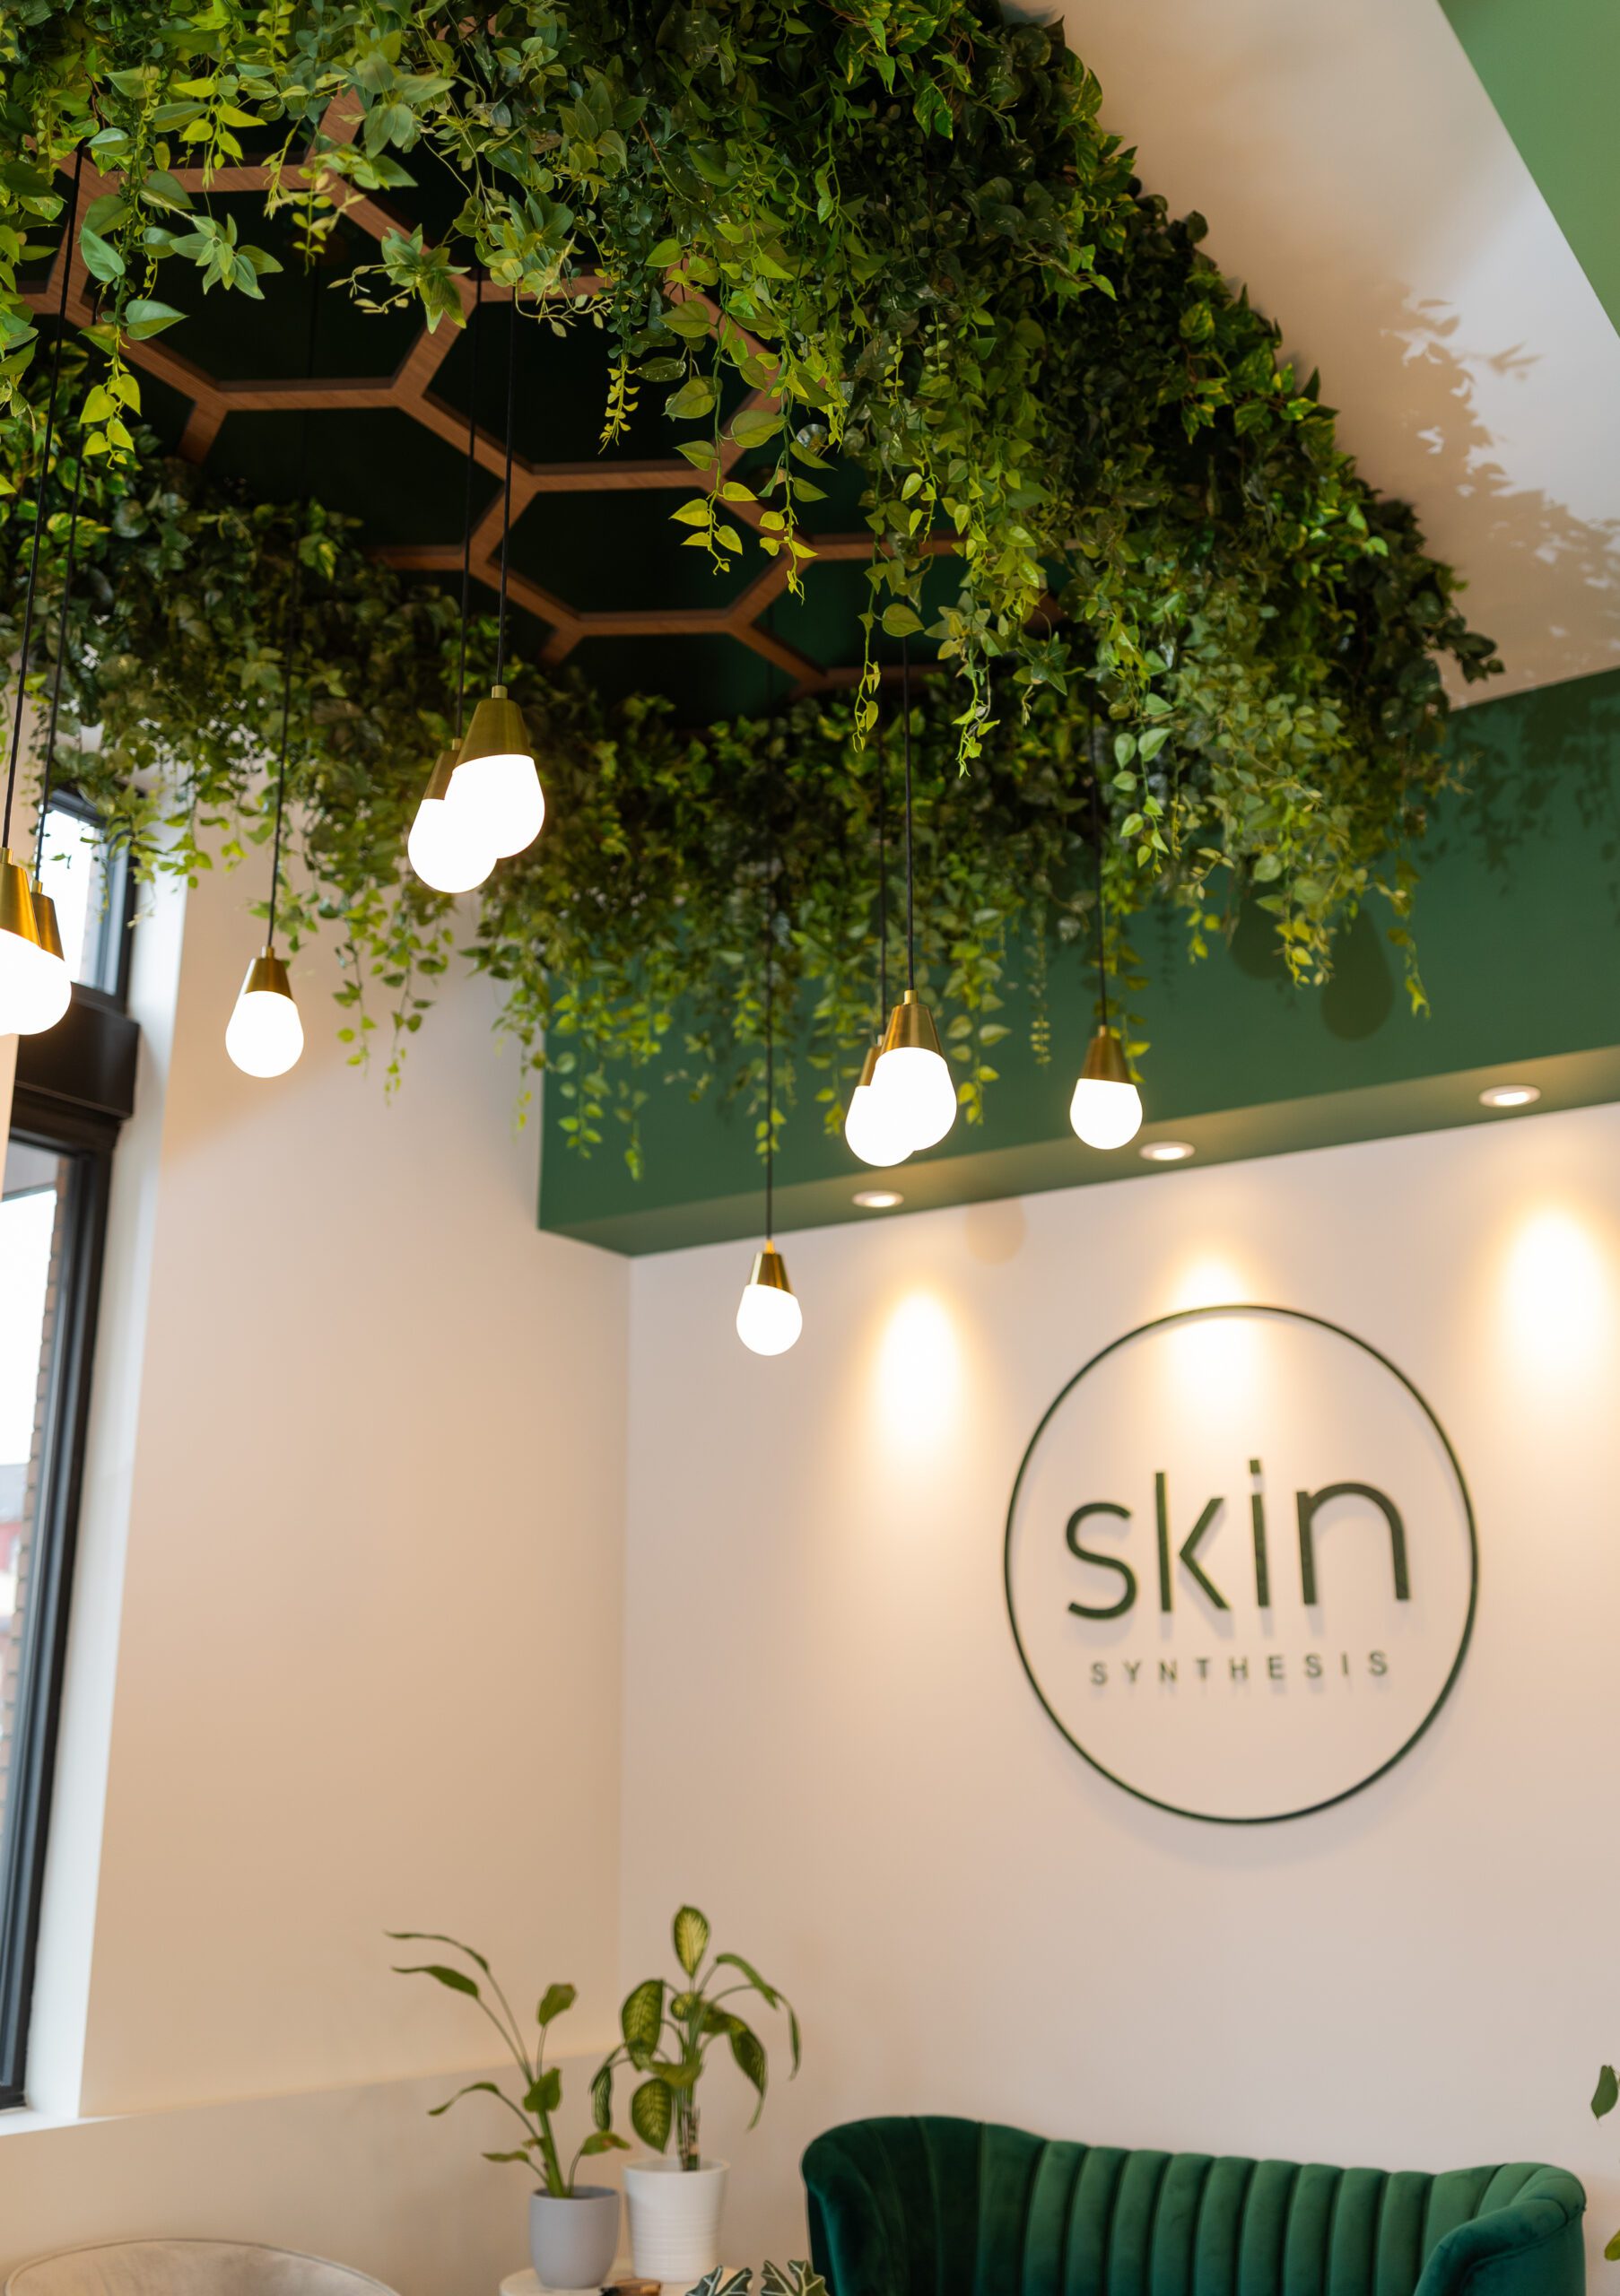 biophilic greenery installation at skin synthesis seattle